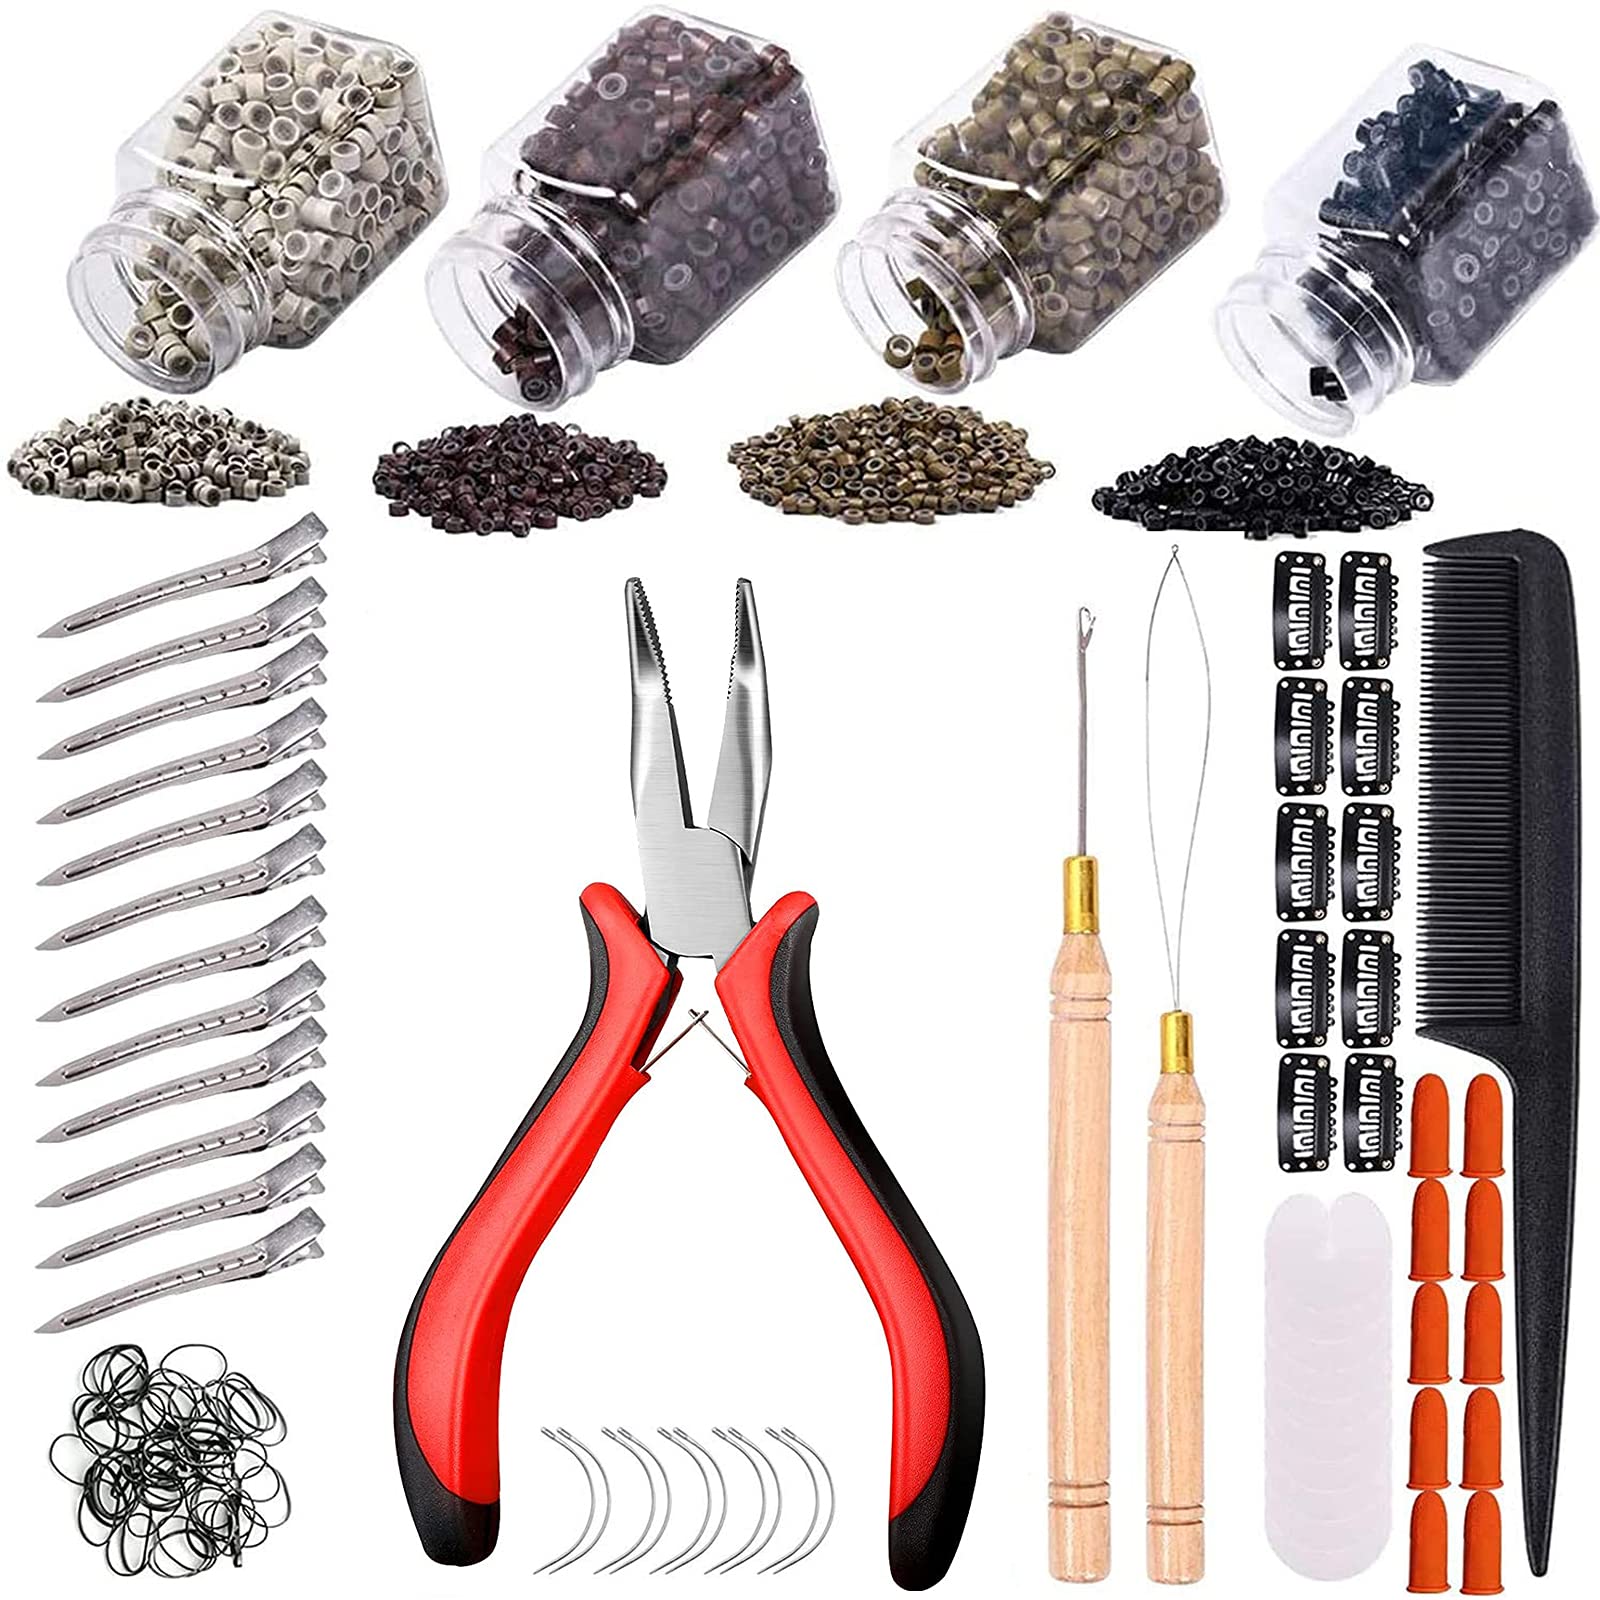 Microlinks Hair Extensions Kit Tool with Needle, Hair Extension